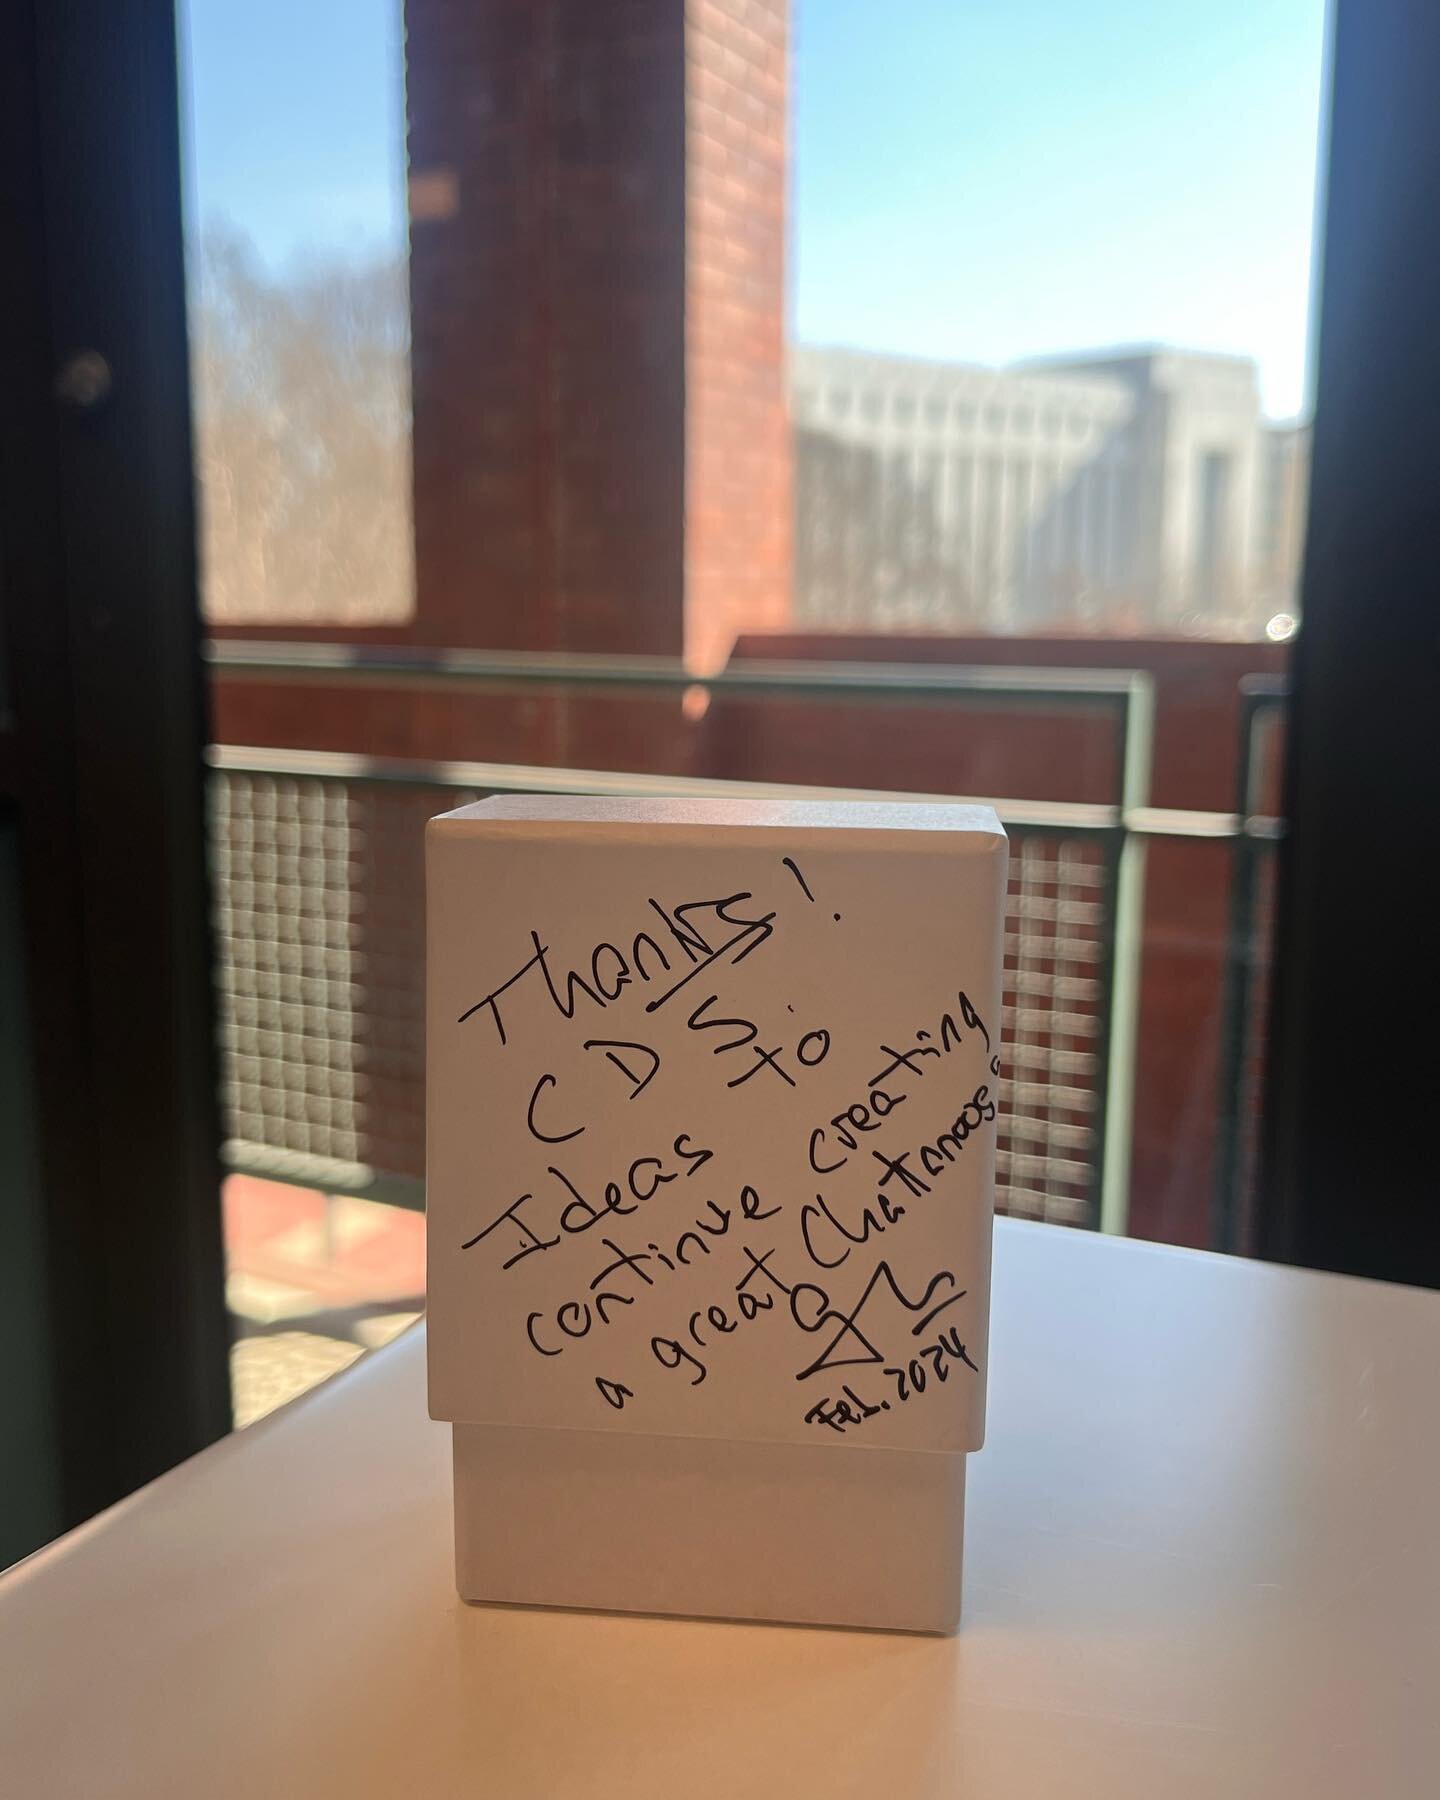 &ldquo;Ideas to continue creating a great Chattanooga&rdquo; -Gil Penalosa, February 2024

Last week @penalosa_gil left our team with a deck of What If cards to guide this collective work. &ldquo;What if everything we did in our cities was great for 